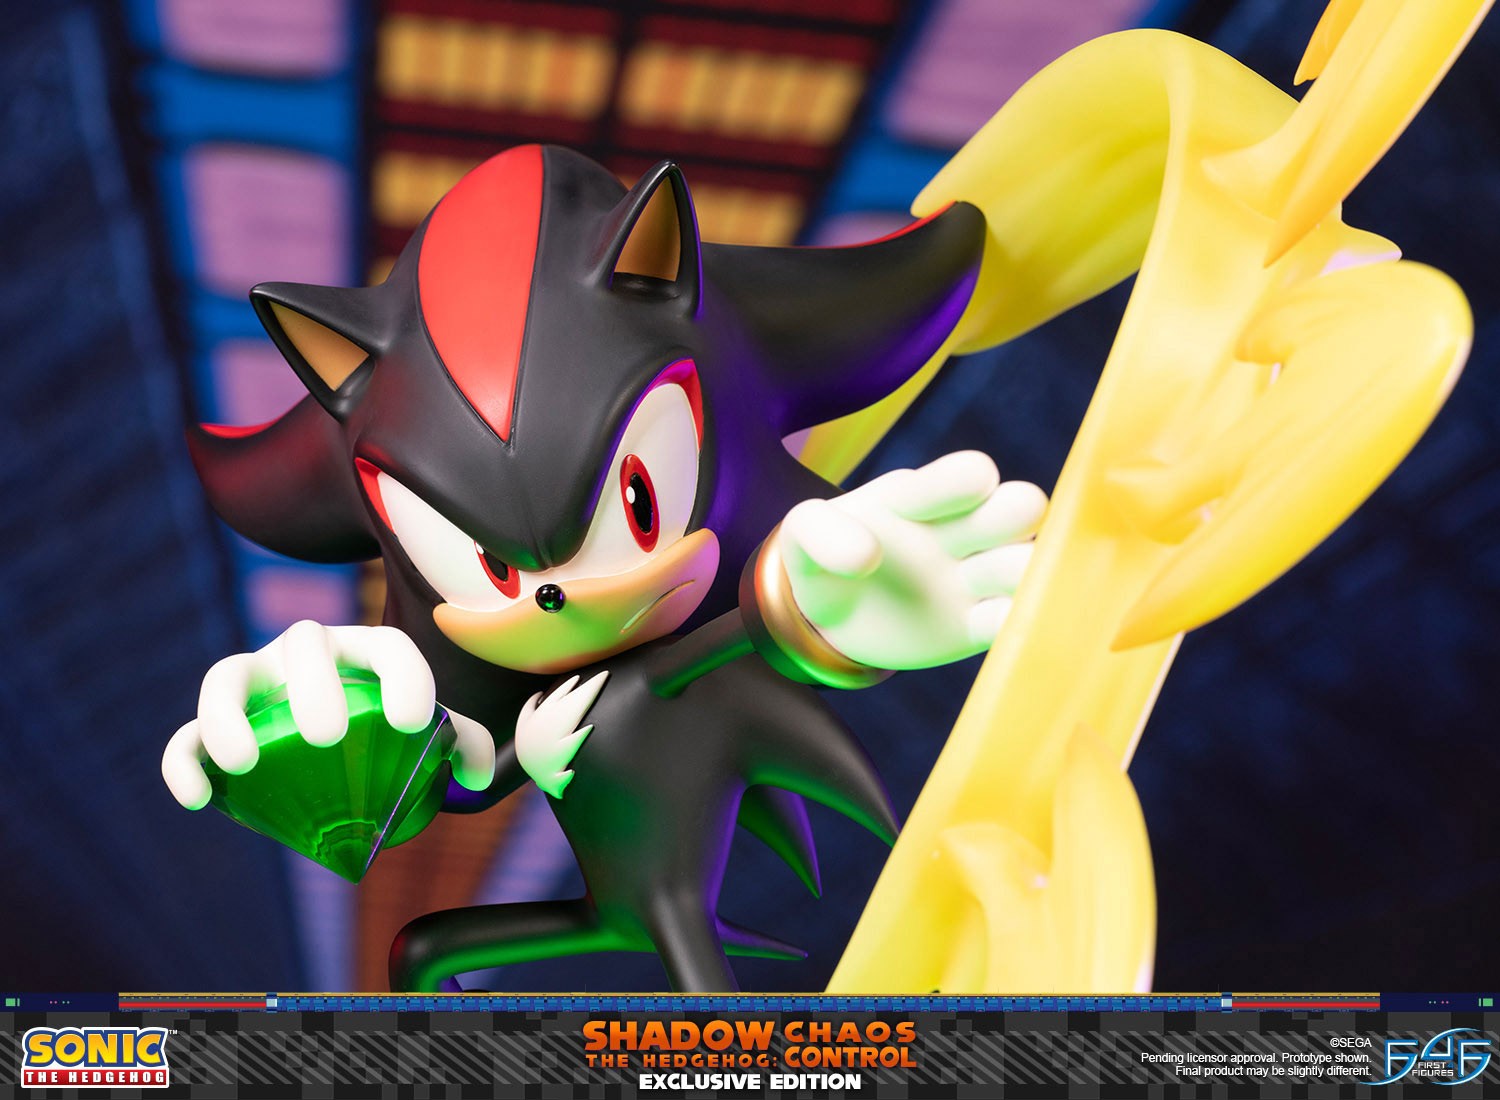 Here's official Sonic Channel art of Shadow and Infinite as idol